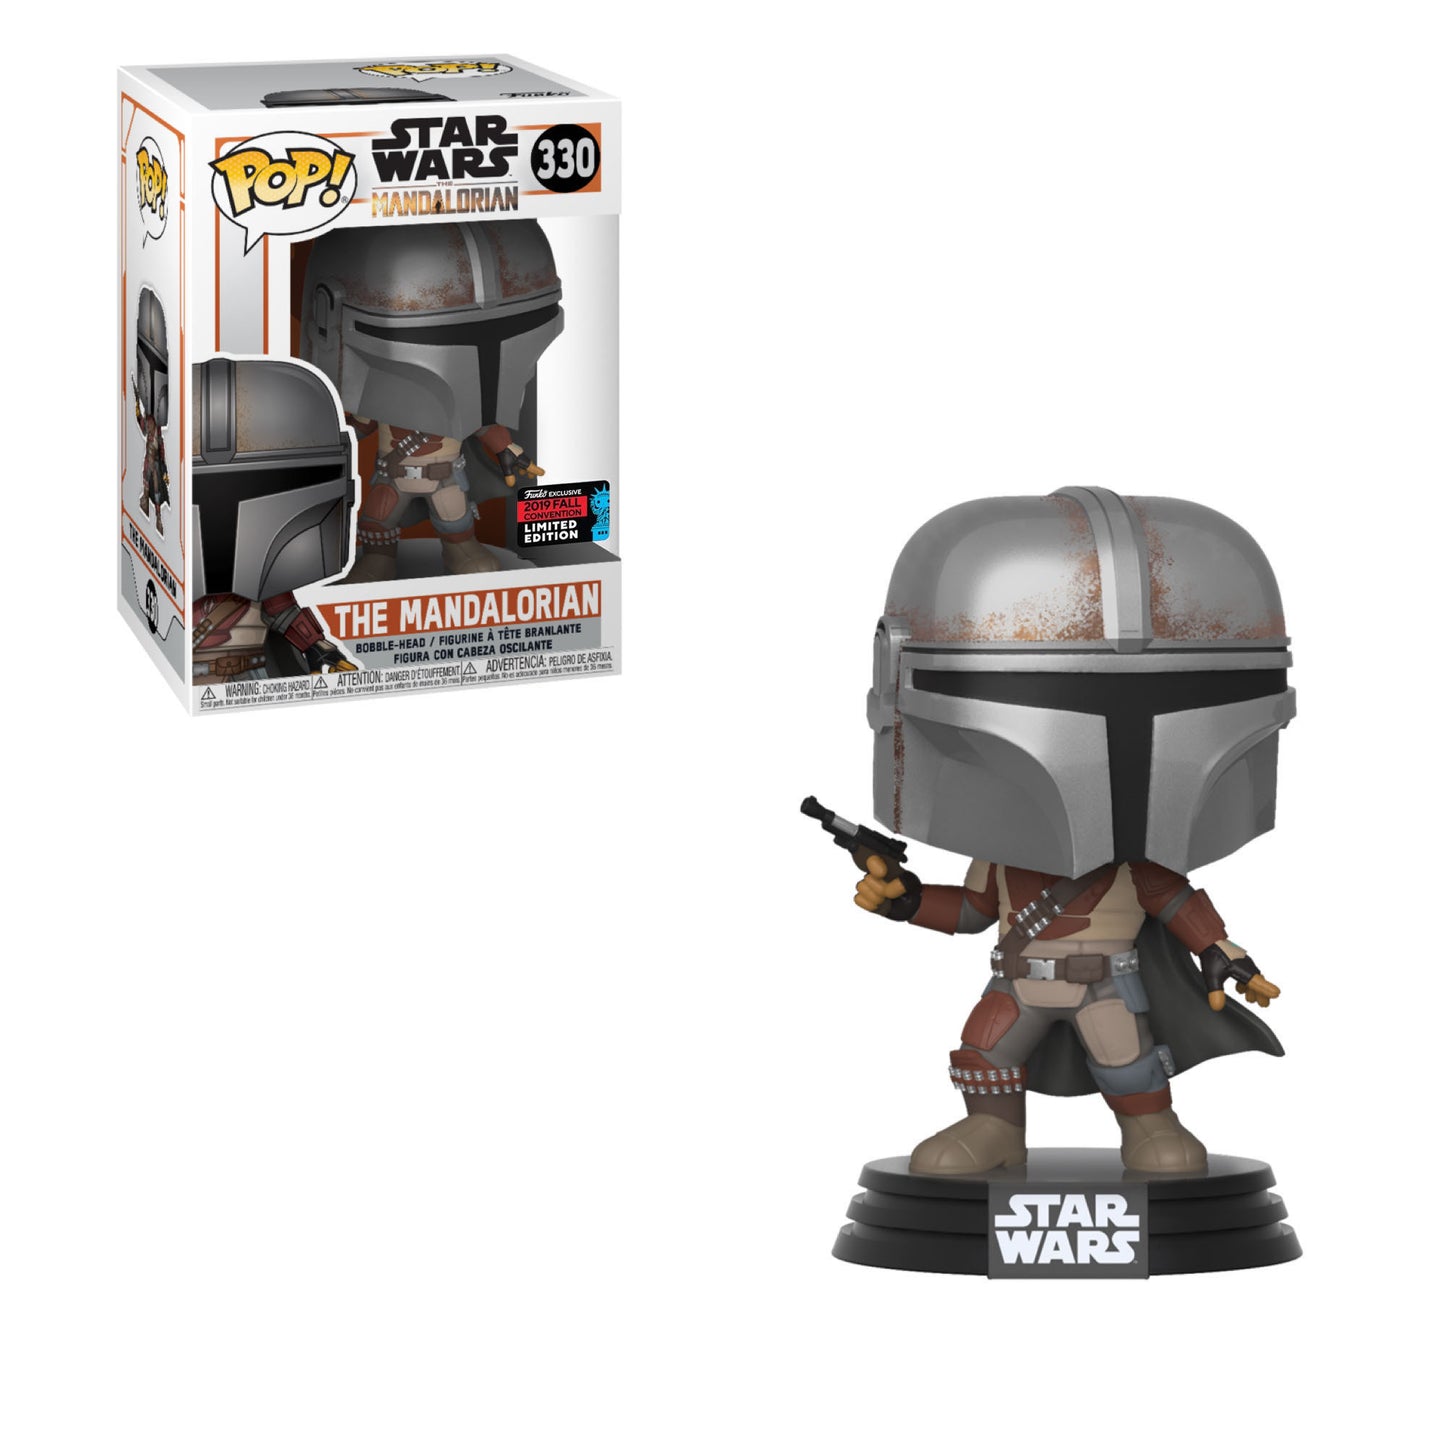 Star Wars: The Mandalorian With Pistol (2019 NYCC Shared Sticker)